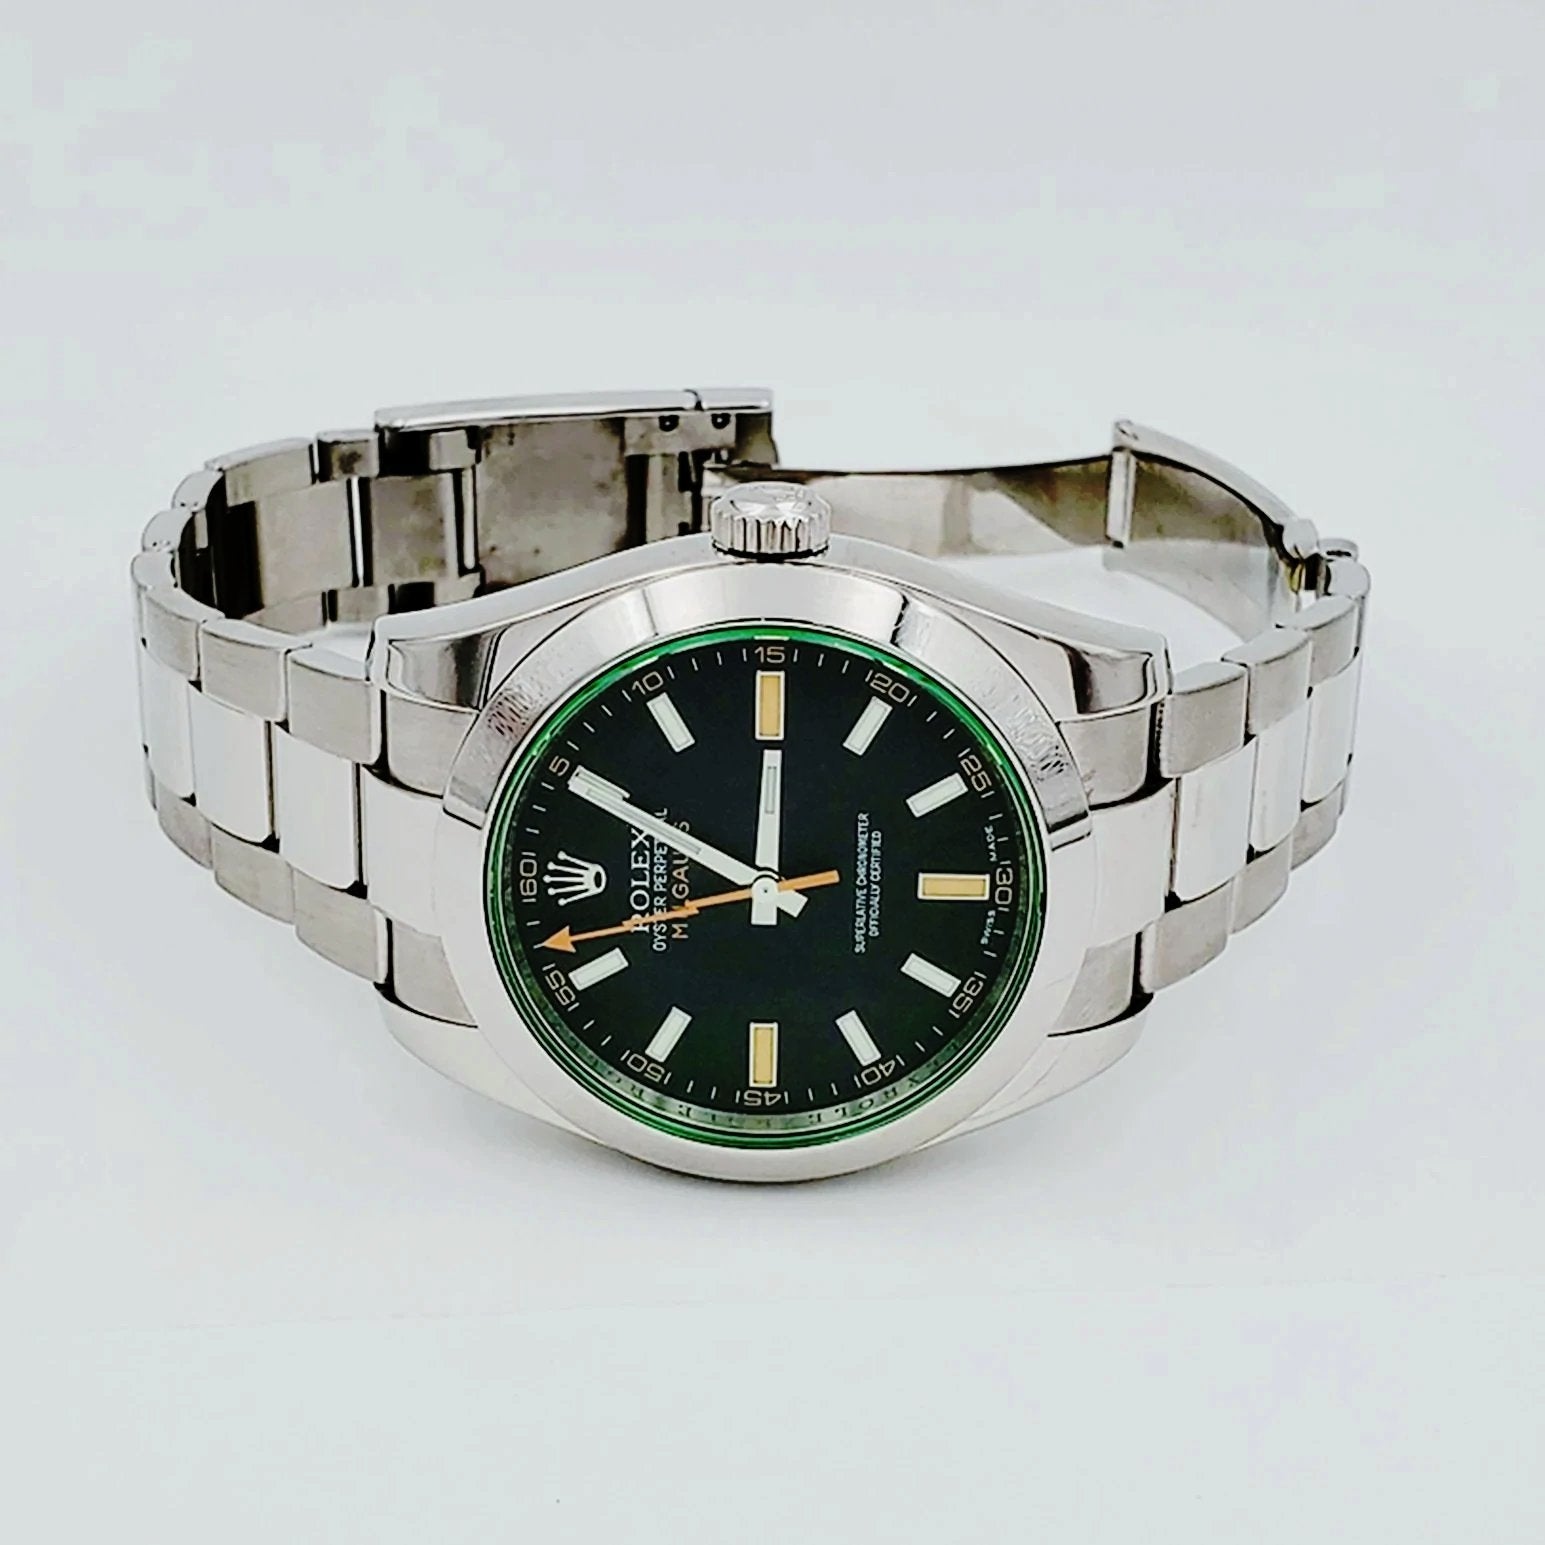 🏷️ PRICE CUT Men's Rolex 40mm Milgauss Oyster Perpetual Stainless Steel Watch with Green Dial and Smooth Bezel. (Pre-Owned 116400GV)